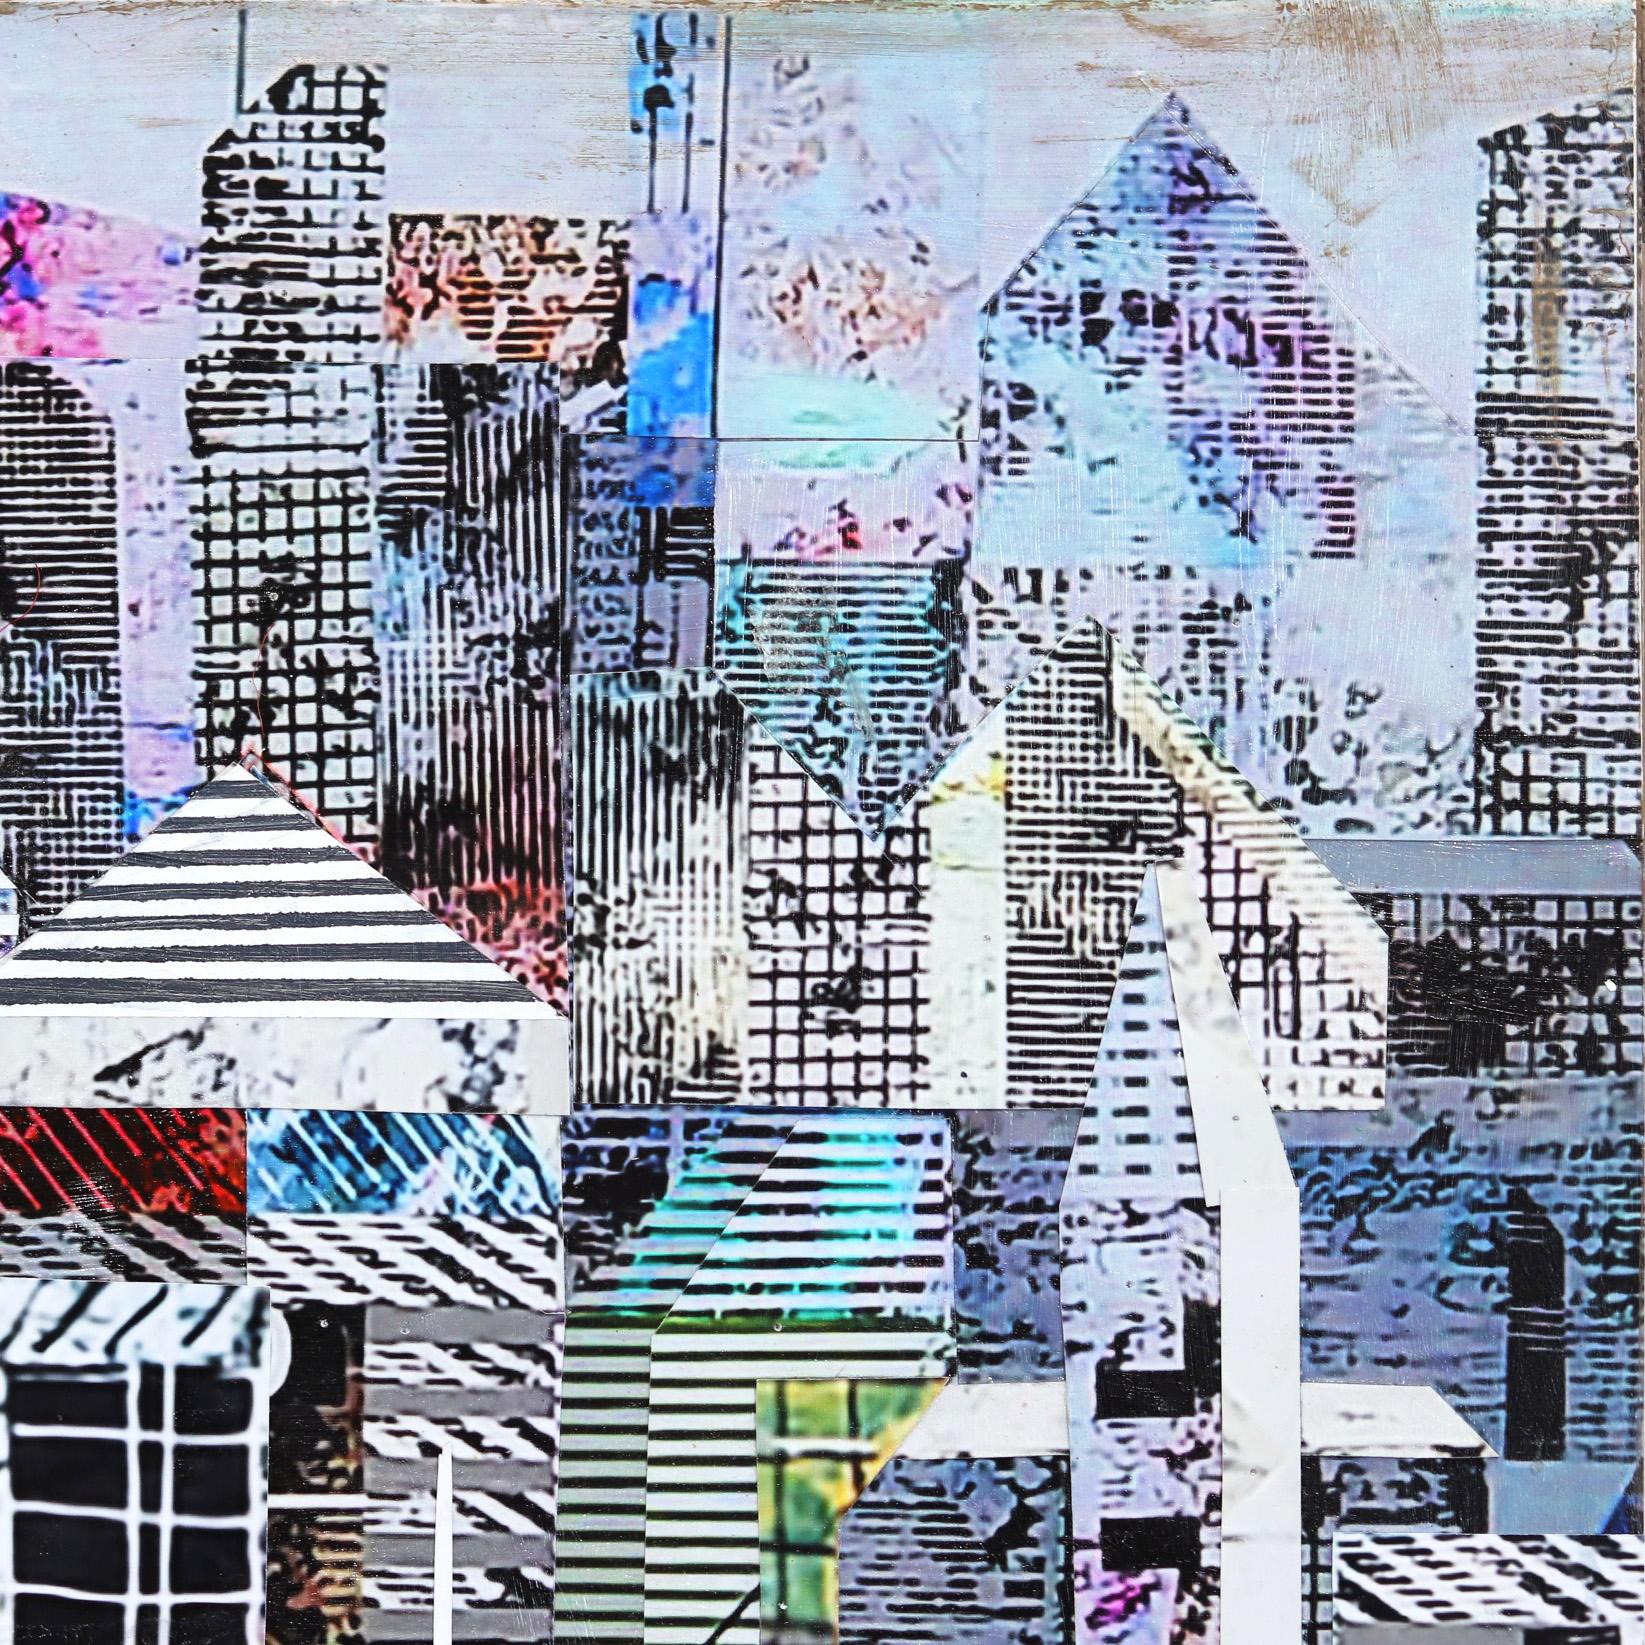 Original Modern City Art Post-Impressionist Collage Painting - Sublime 2153 - Gray Abstract Painting by Tae Ho Kang